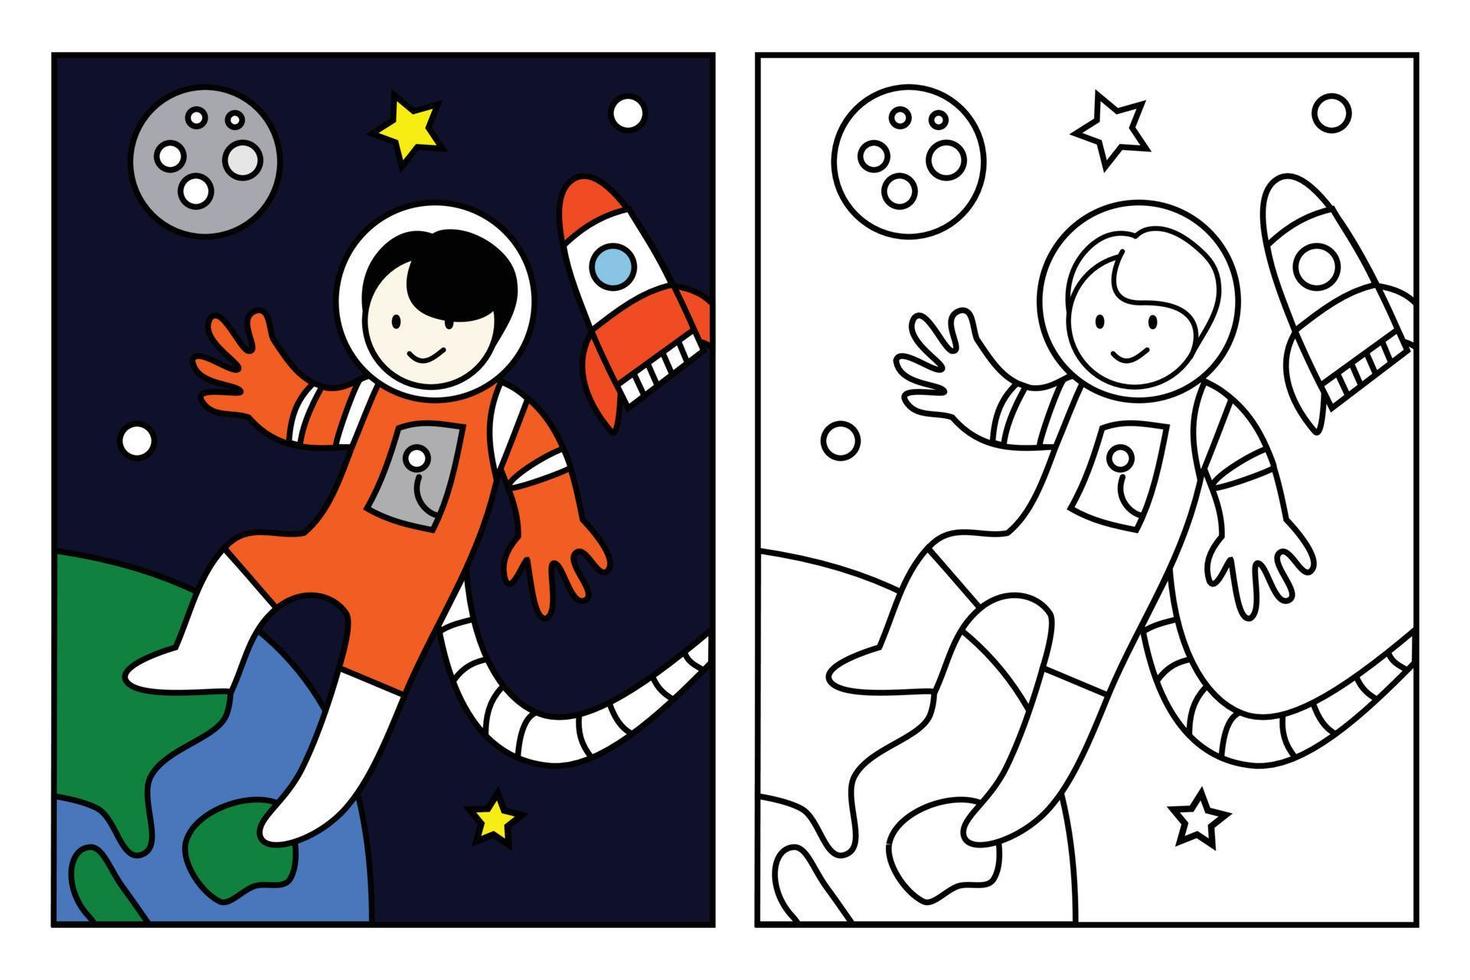 Astronaut flying in the space coloring page for kids drawing education. Simple cartoon illustration in fantasy theme for coloring book vector